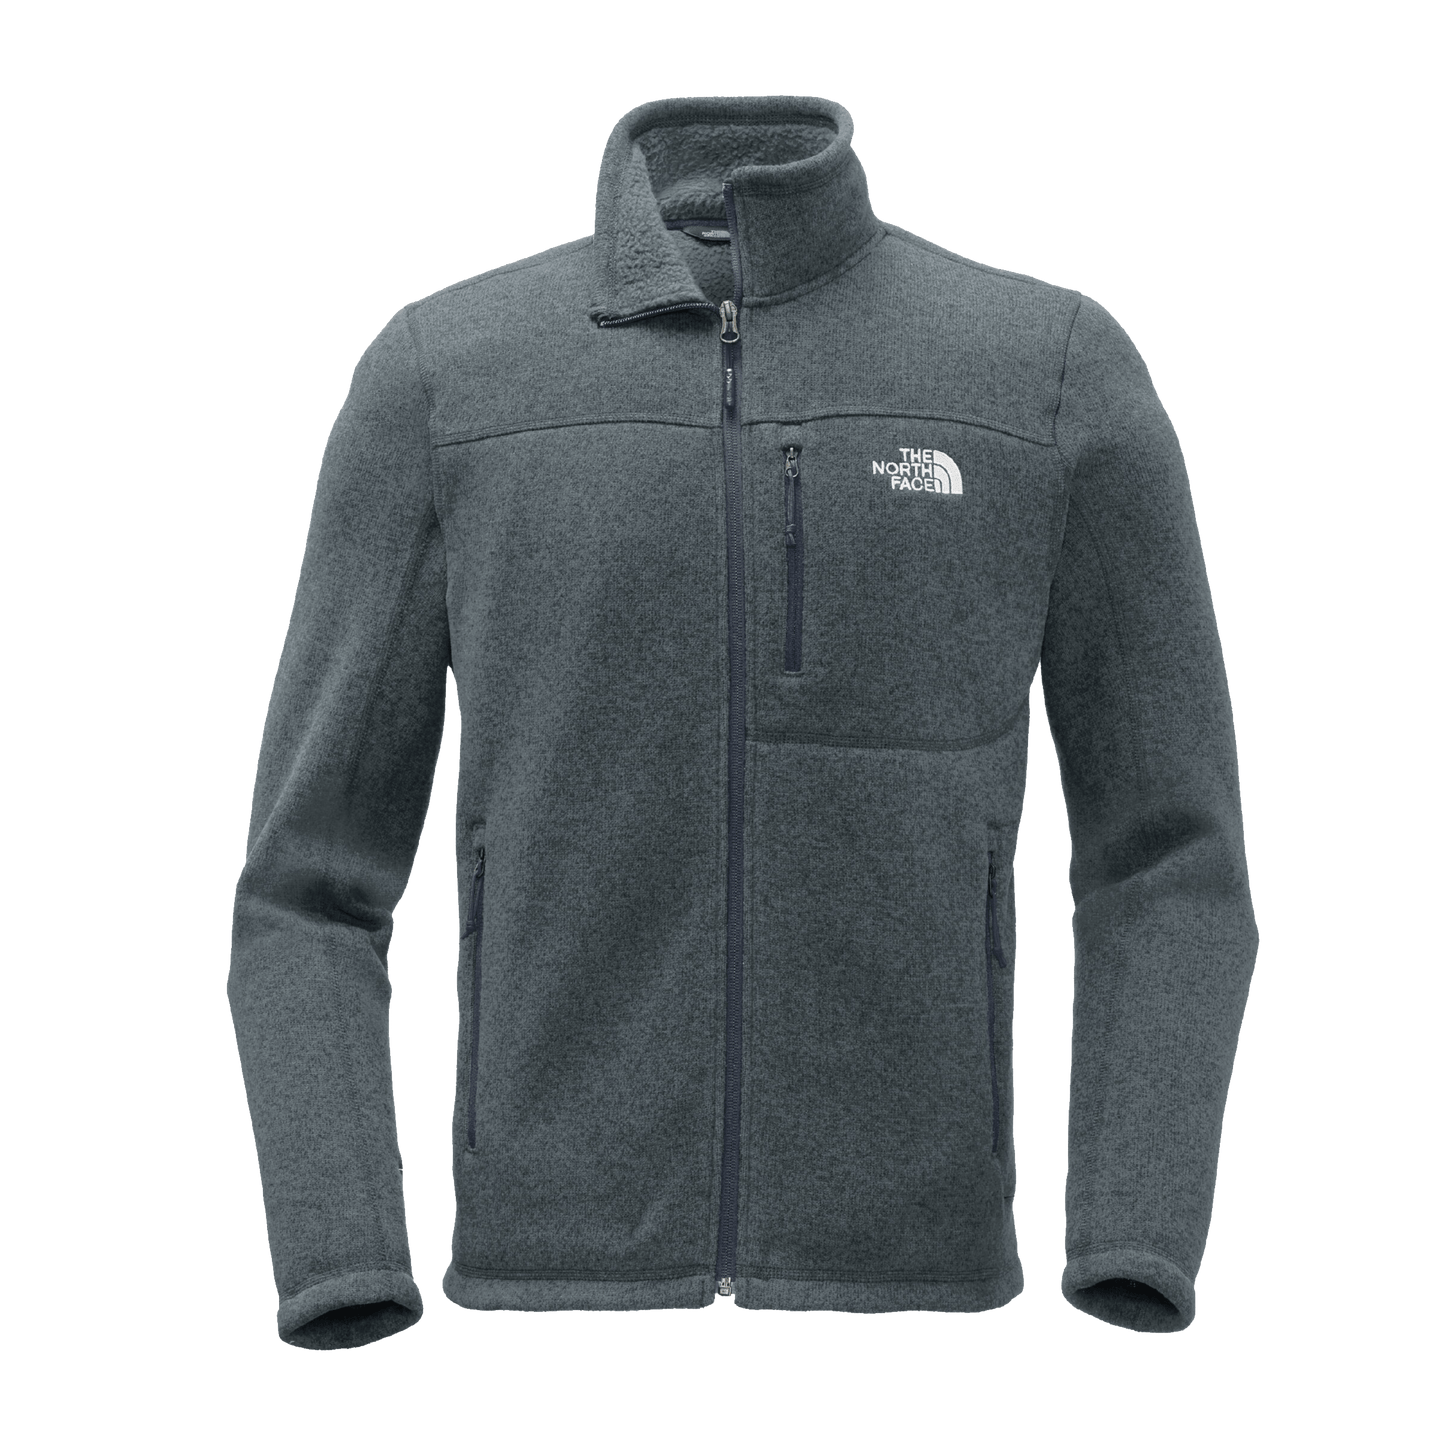 The North Face® Sweater Fleece Jacket - The Monogram Company